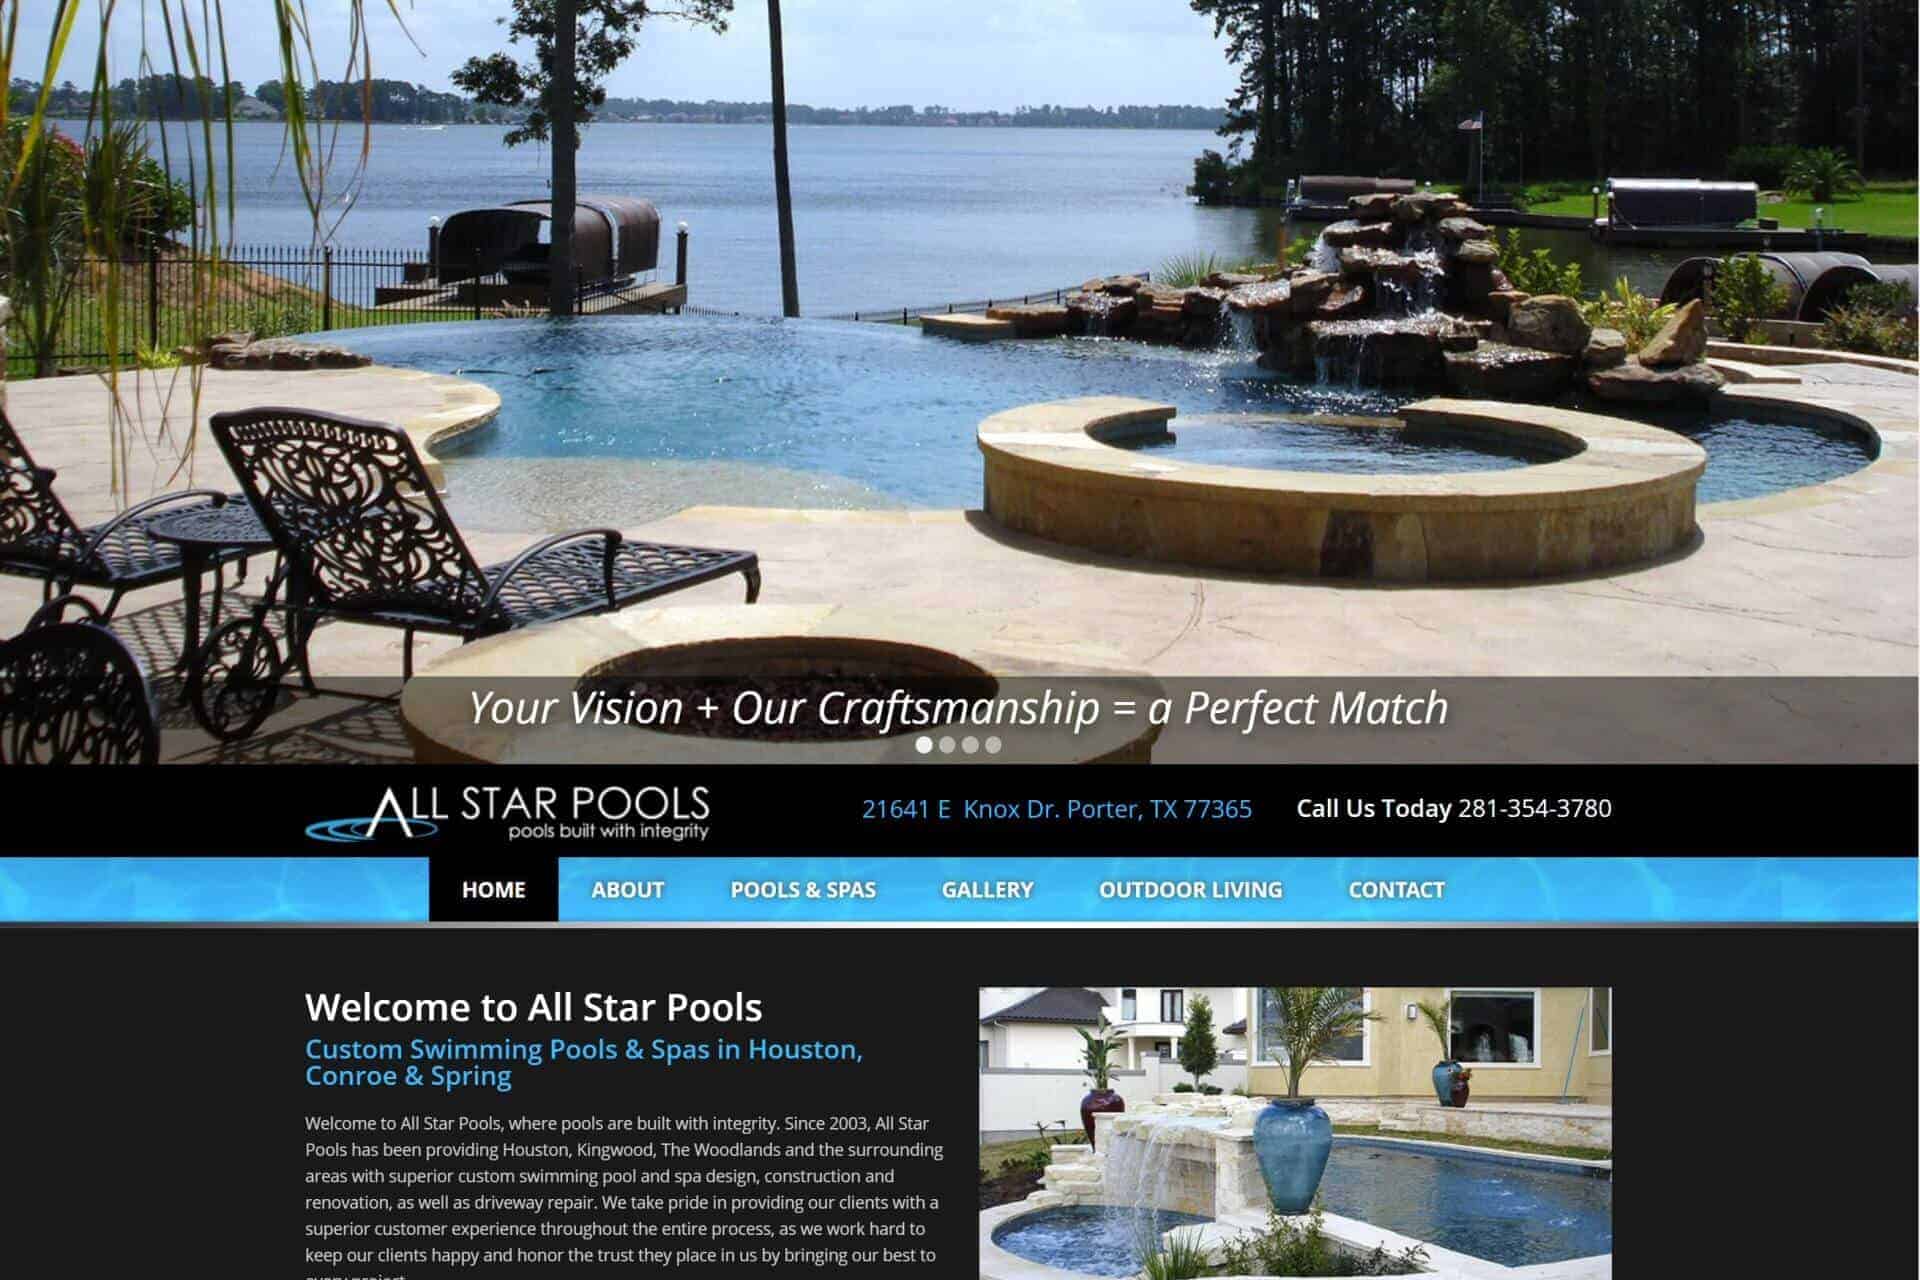 All Star Pools by Derrico Financial Services